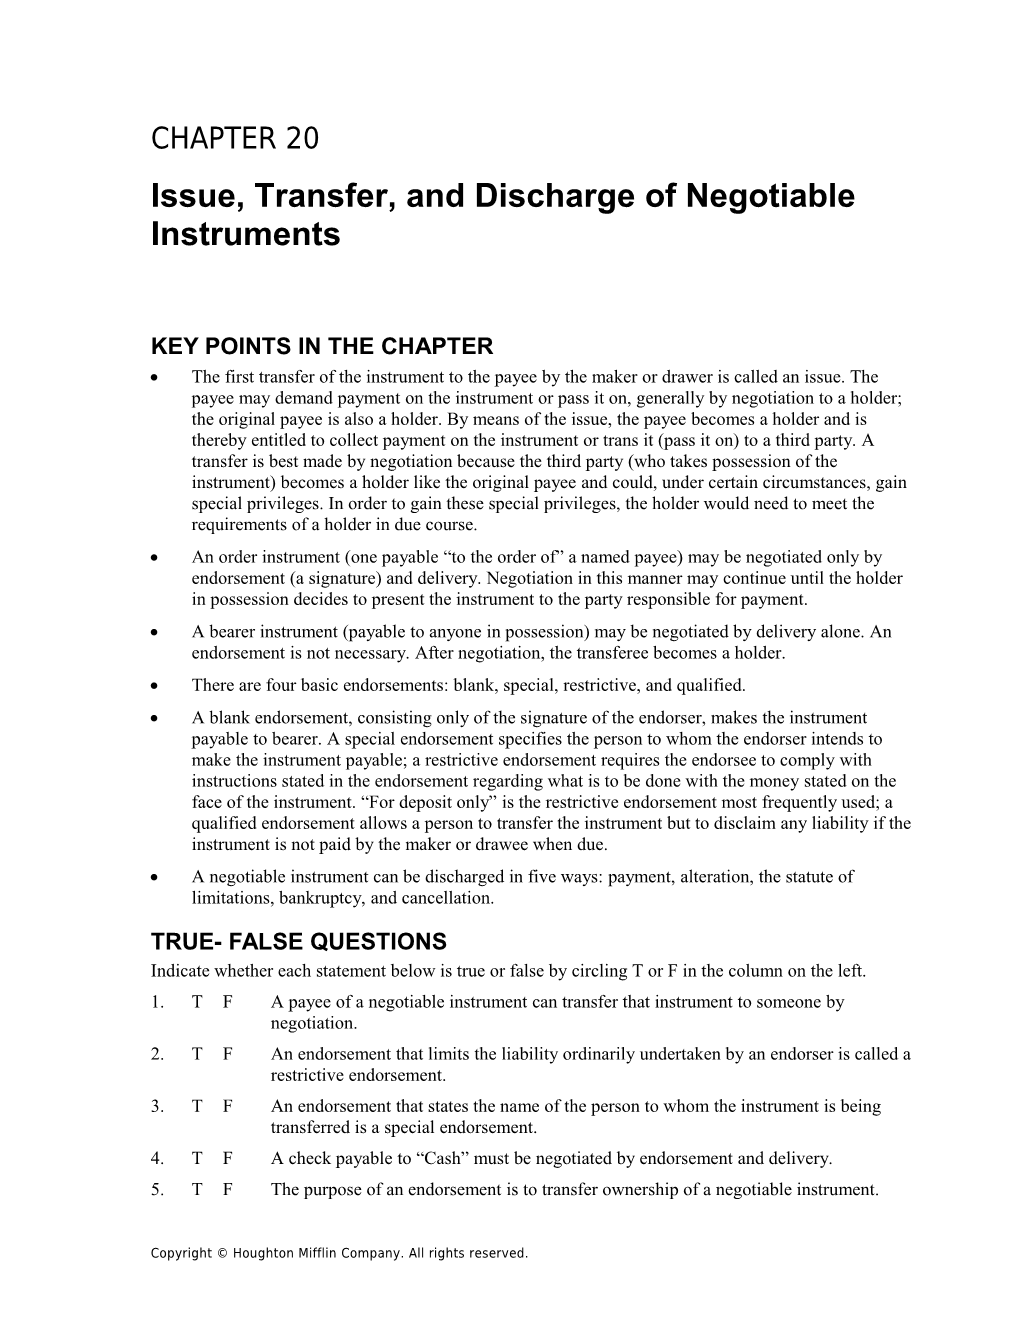 Chapter 20: Issue, Transfer, and Discharge of Negotiable Instruments 1